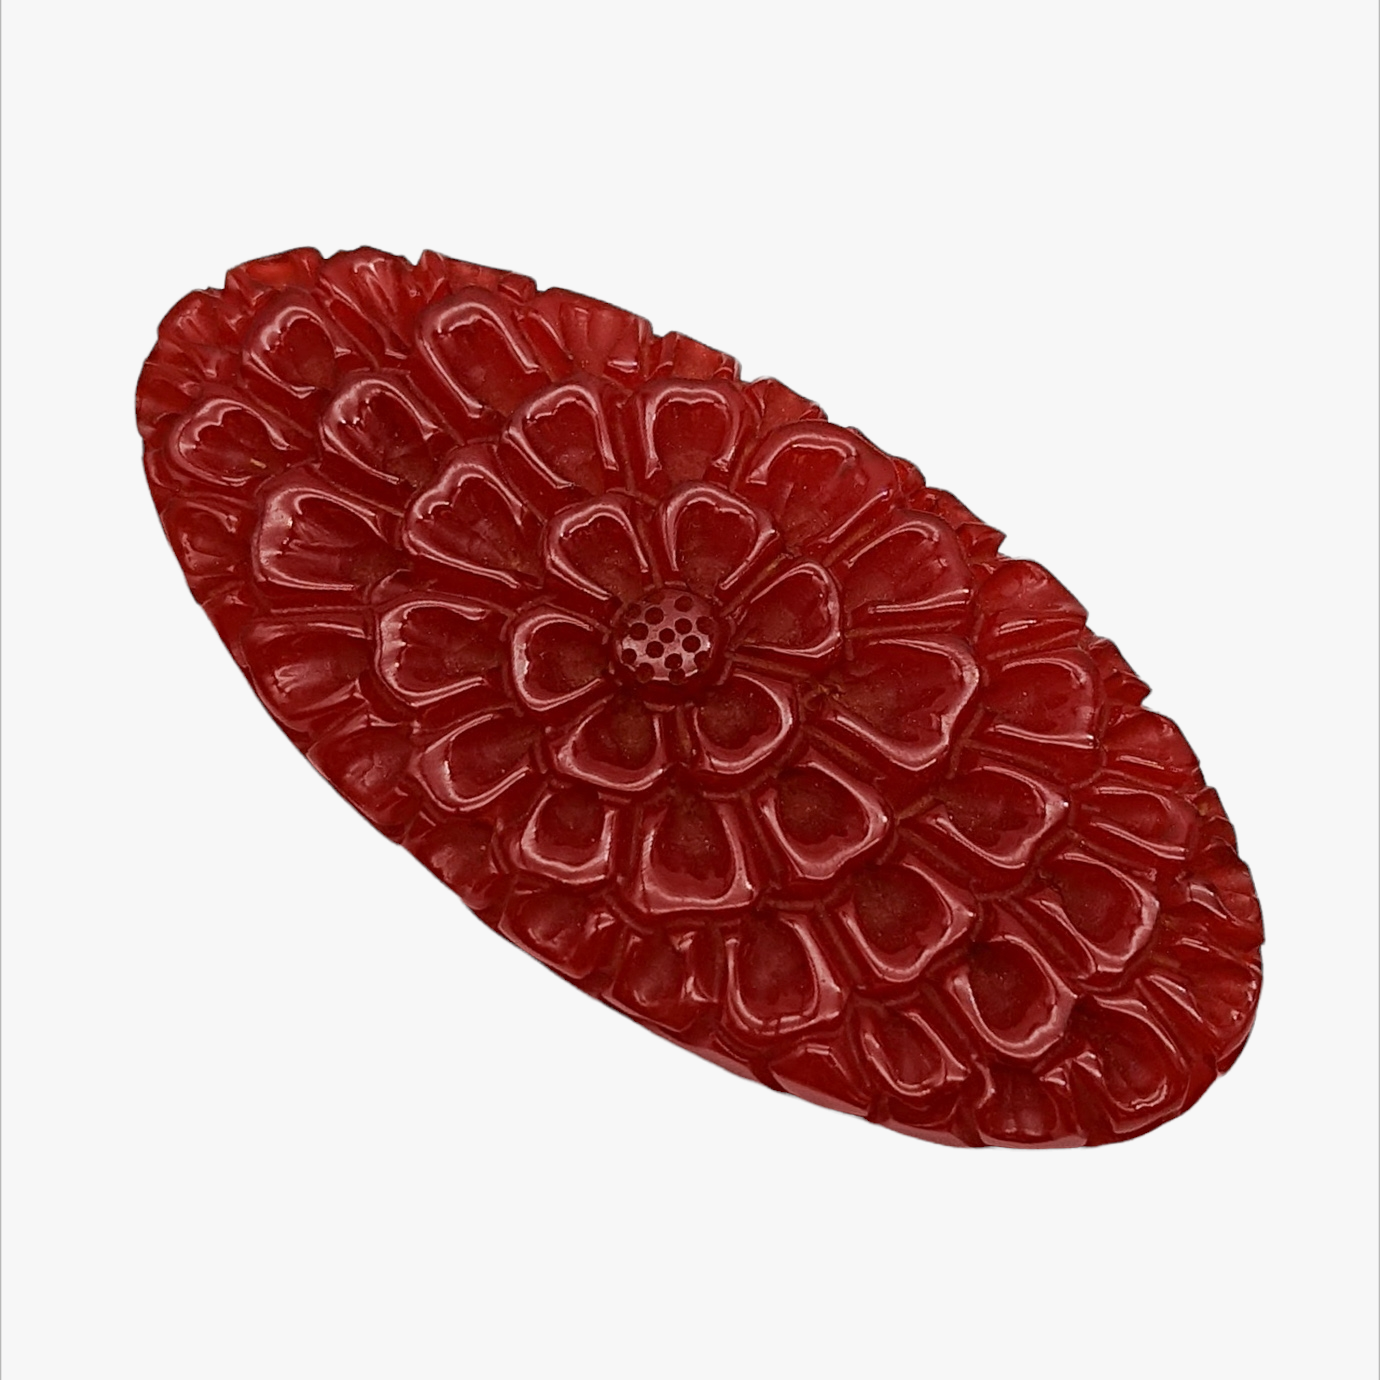 Vintage Cherry Red Giant Oval Carved Brooch